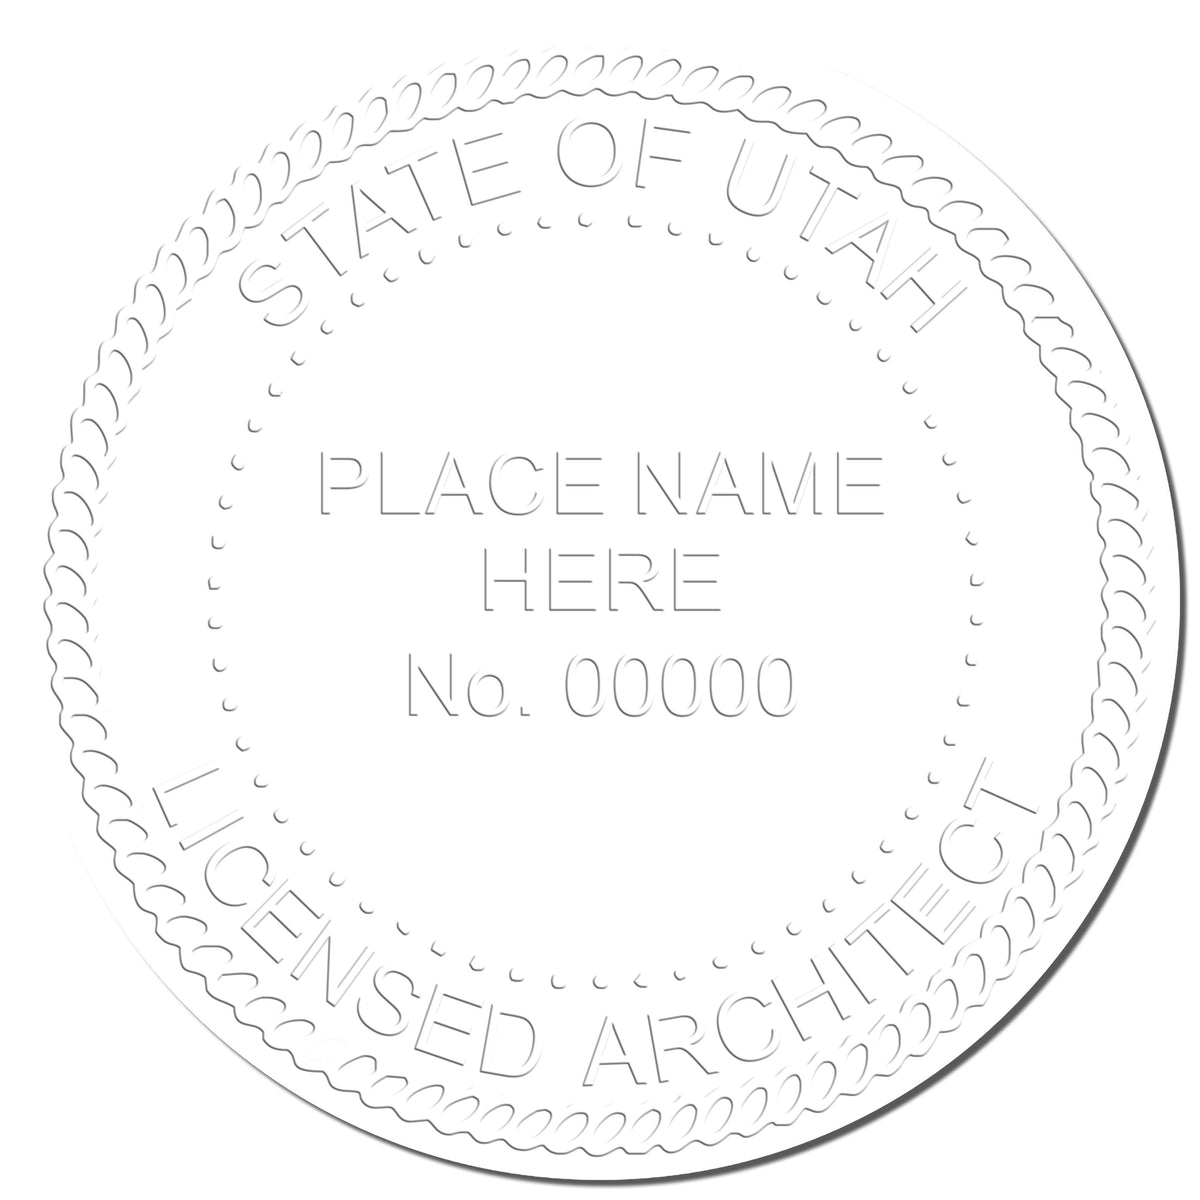 This paper is stamped with a sample imprint of the Hybrid Utah Architect Seal, signifying its quality and reliability.